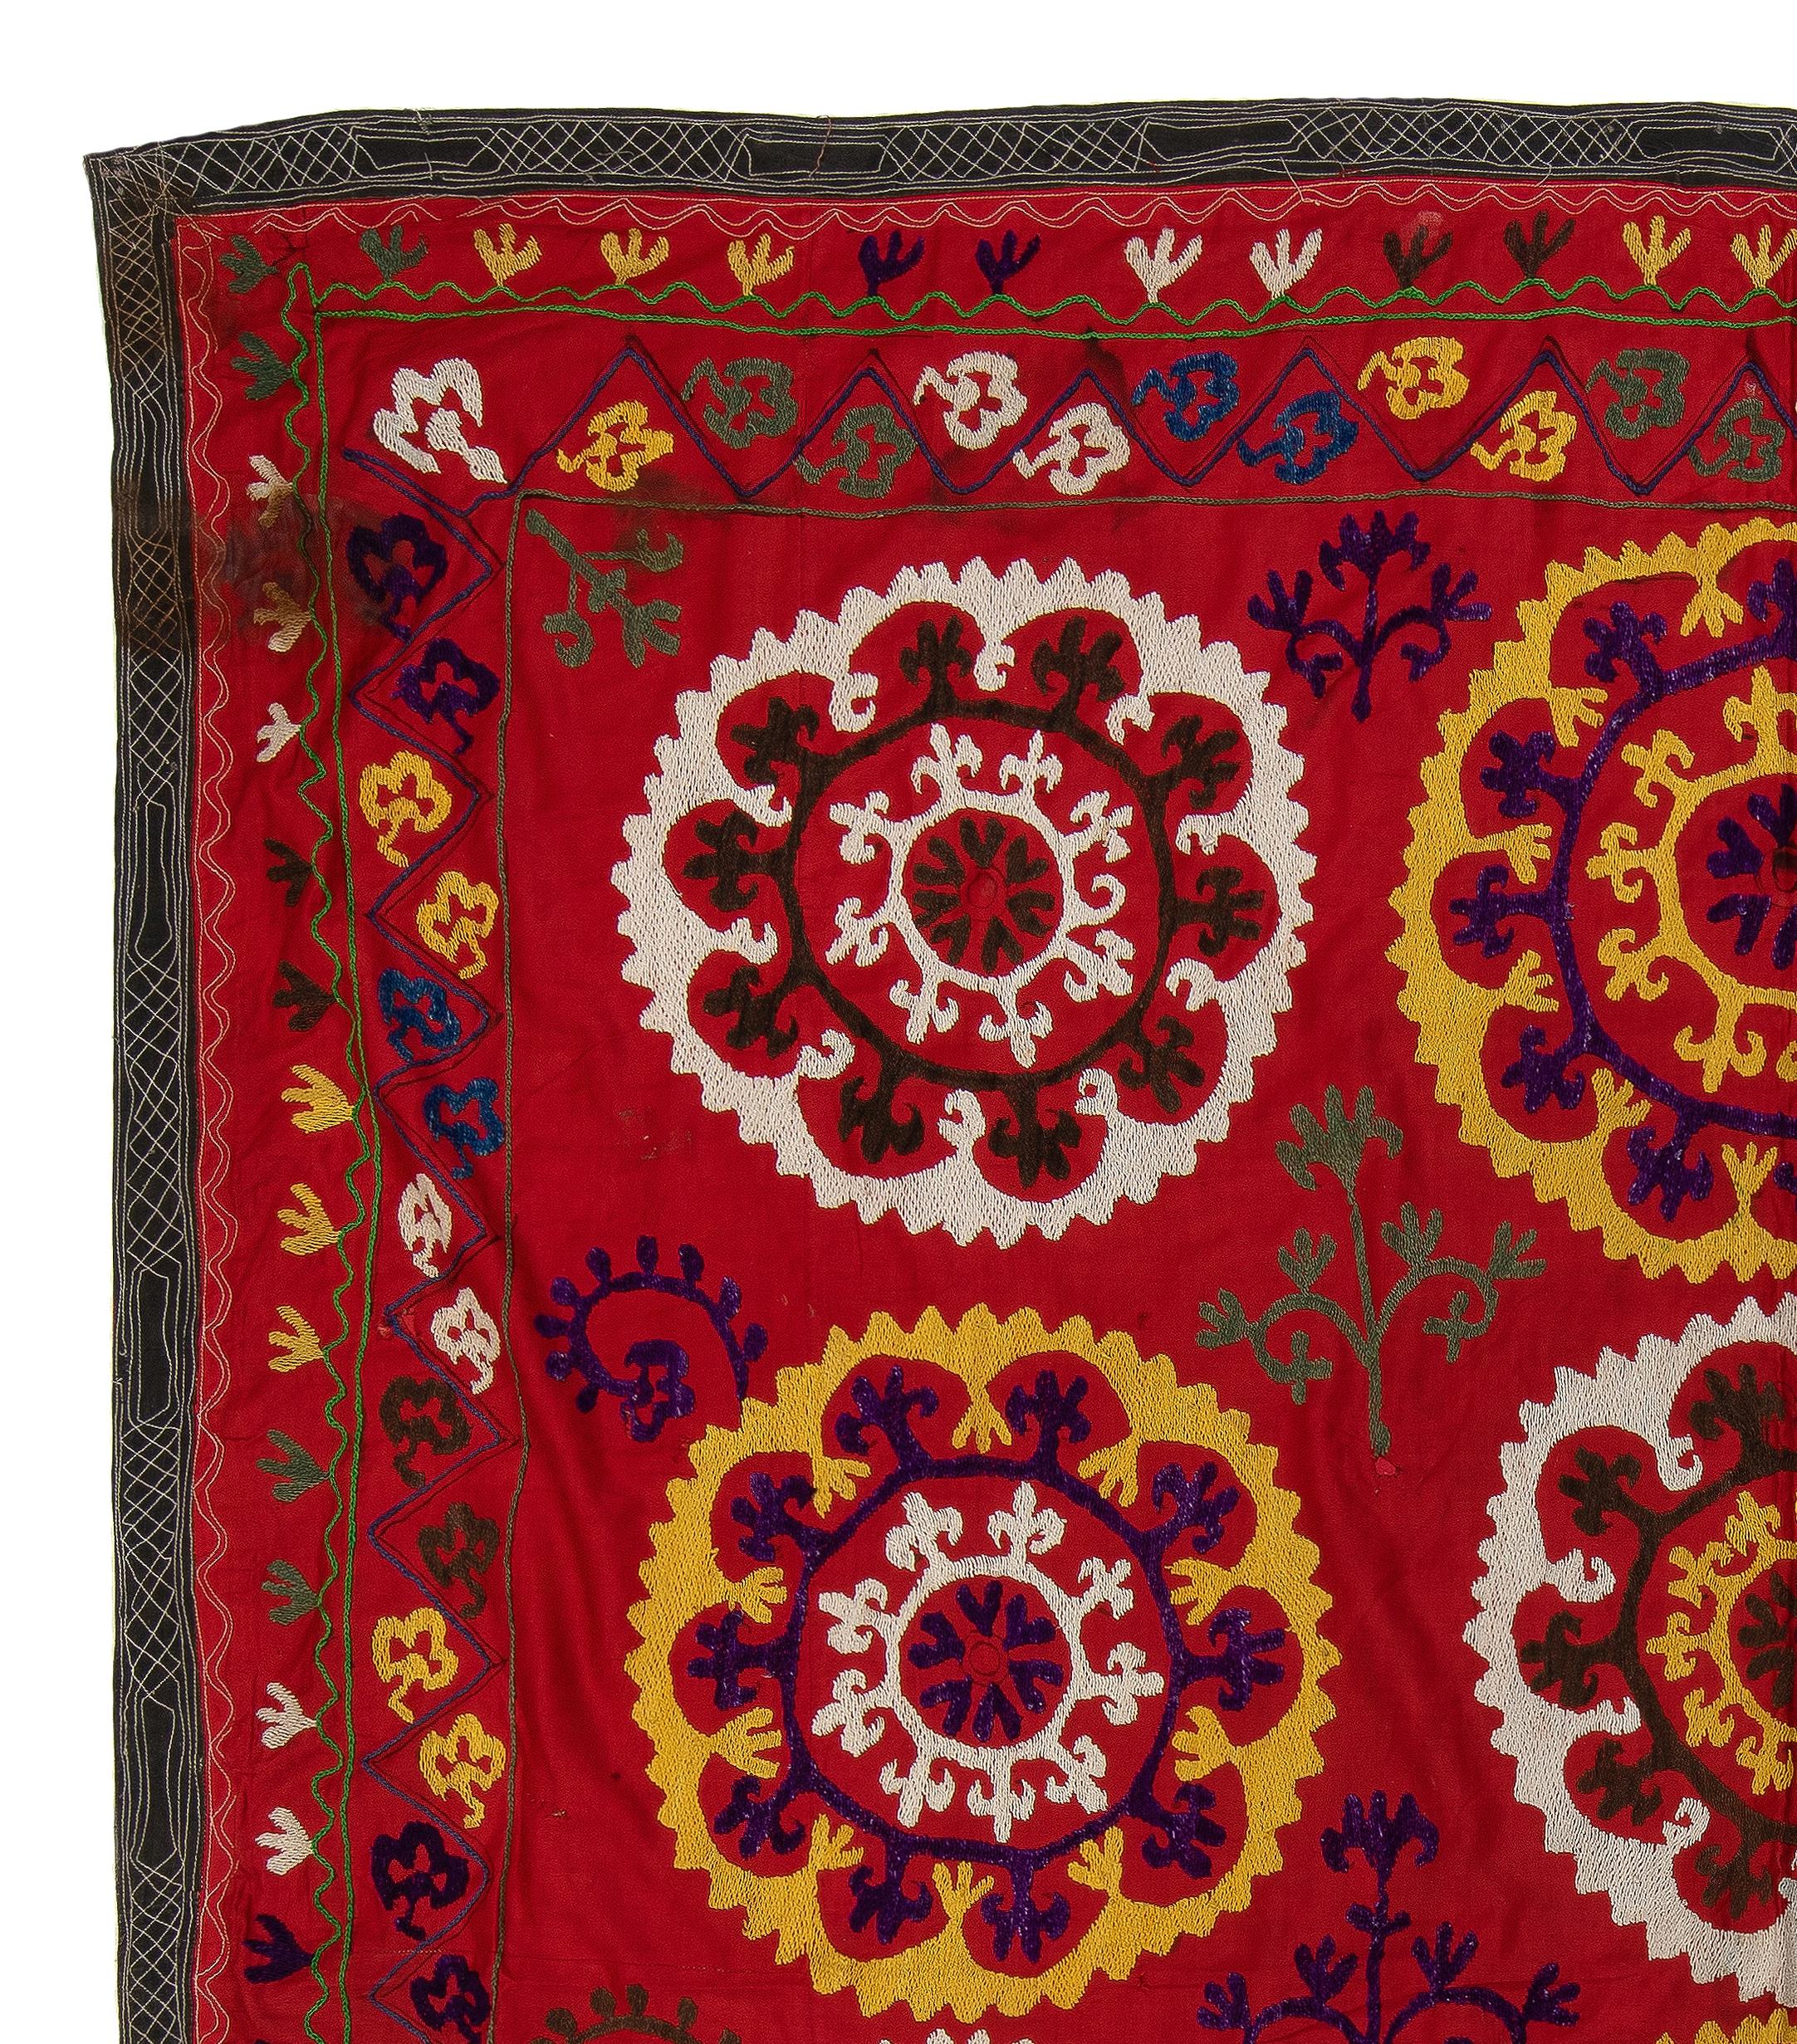 Suzani 5.8x6.5 Ft Vintage Bedspread, Red Throw, Silk Wall Hanging, Embroidered Tapestry For Sale